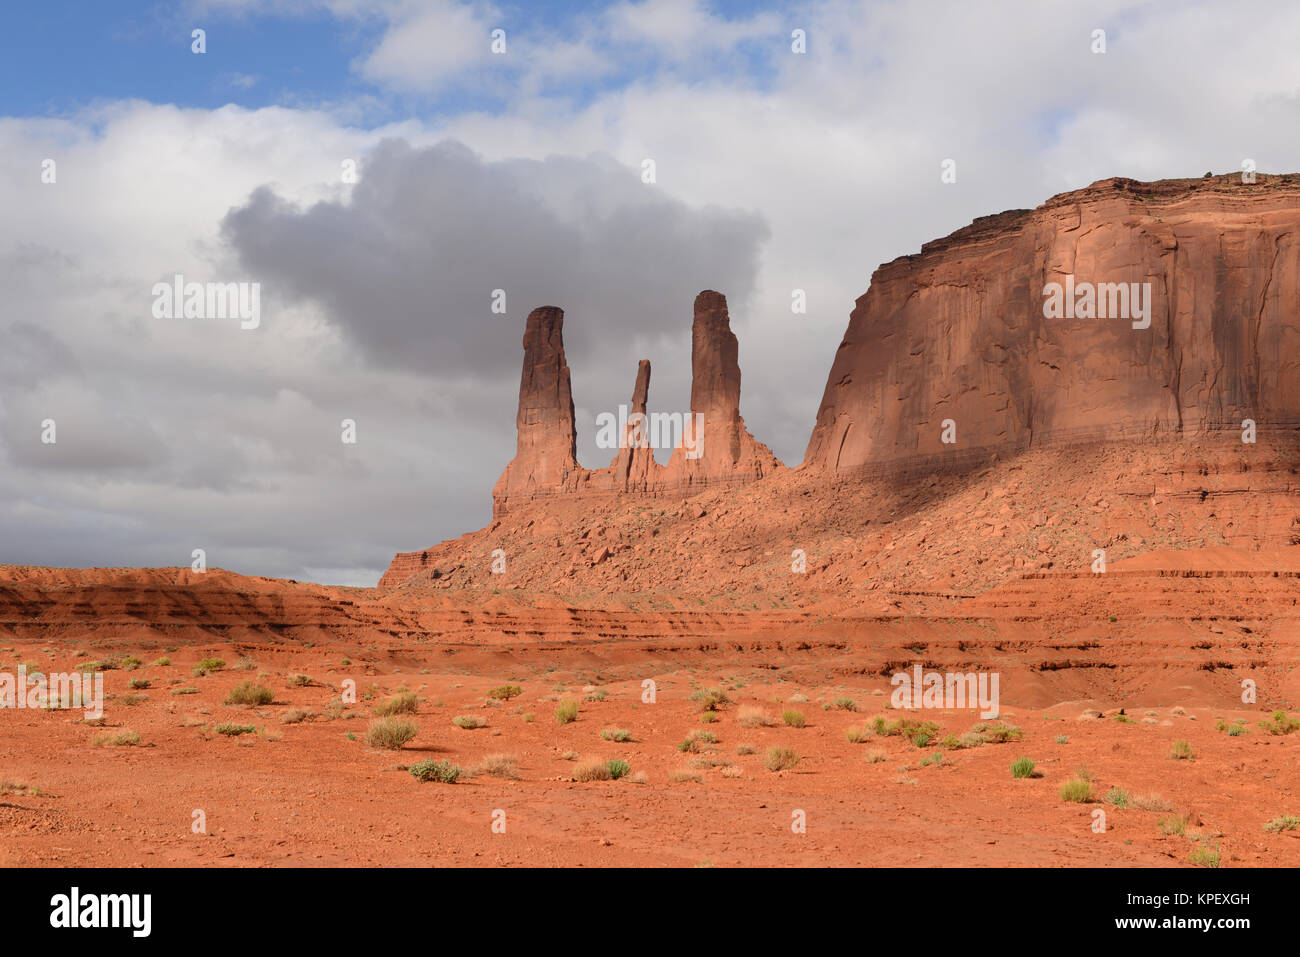 Sandstone Formation of Three Sisters - The close view of unique sandstone spires, called 'Three Sisters', in the Monument Valley, Utah & Arizona, USA. Stock Photo